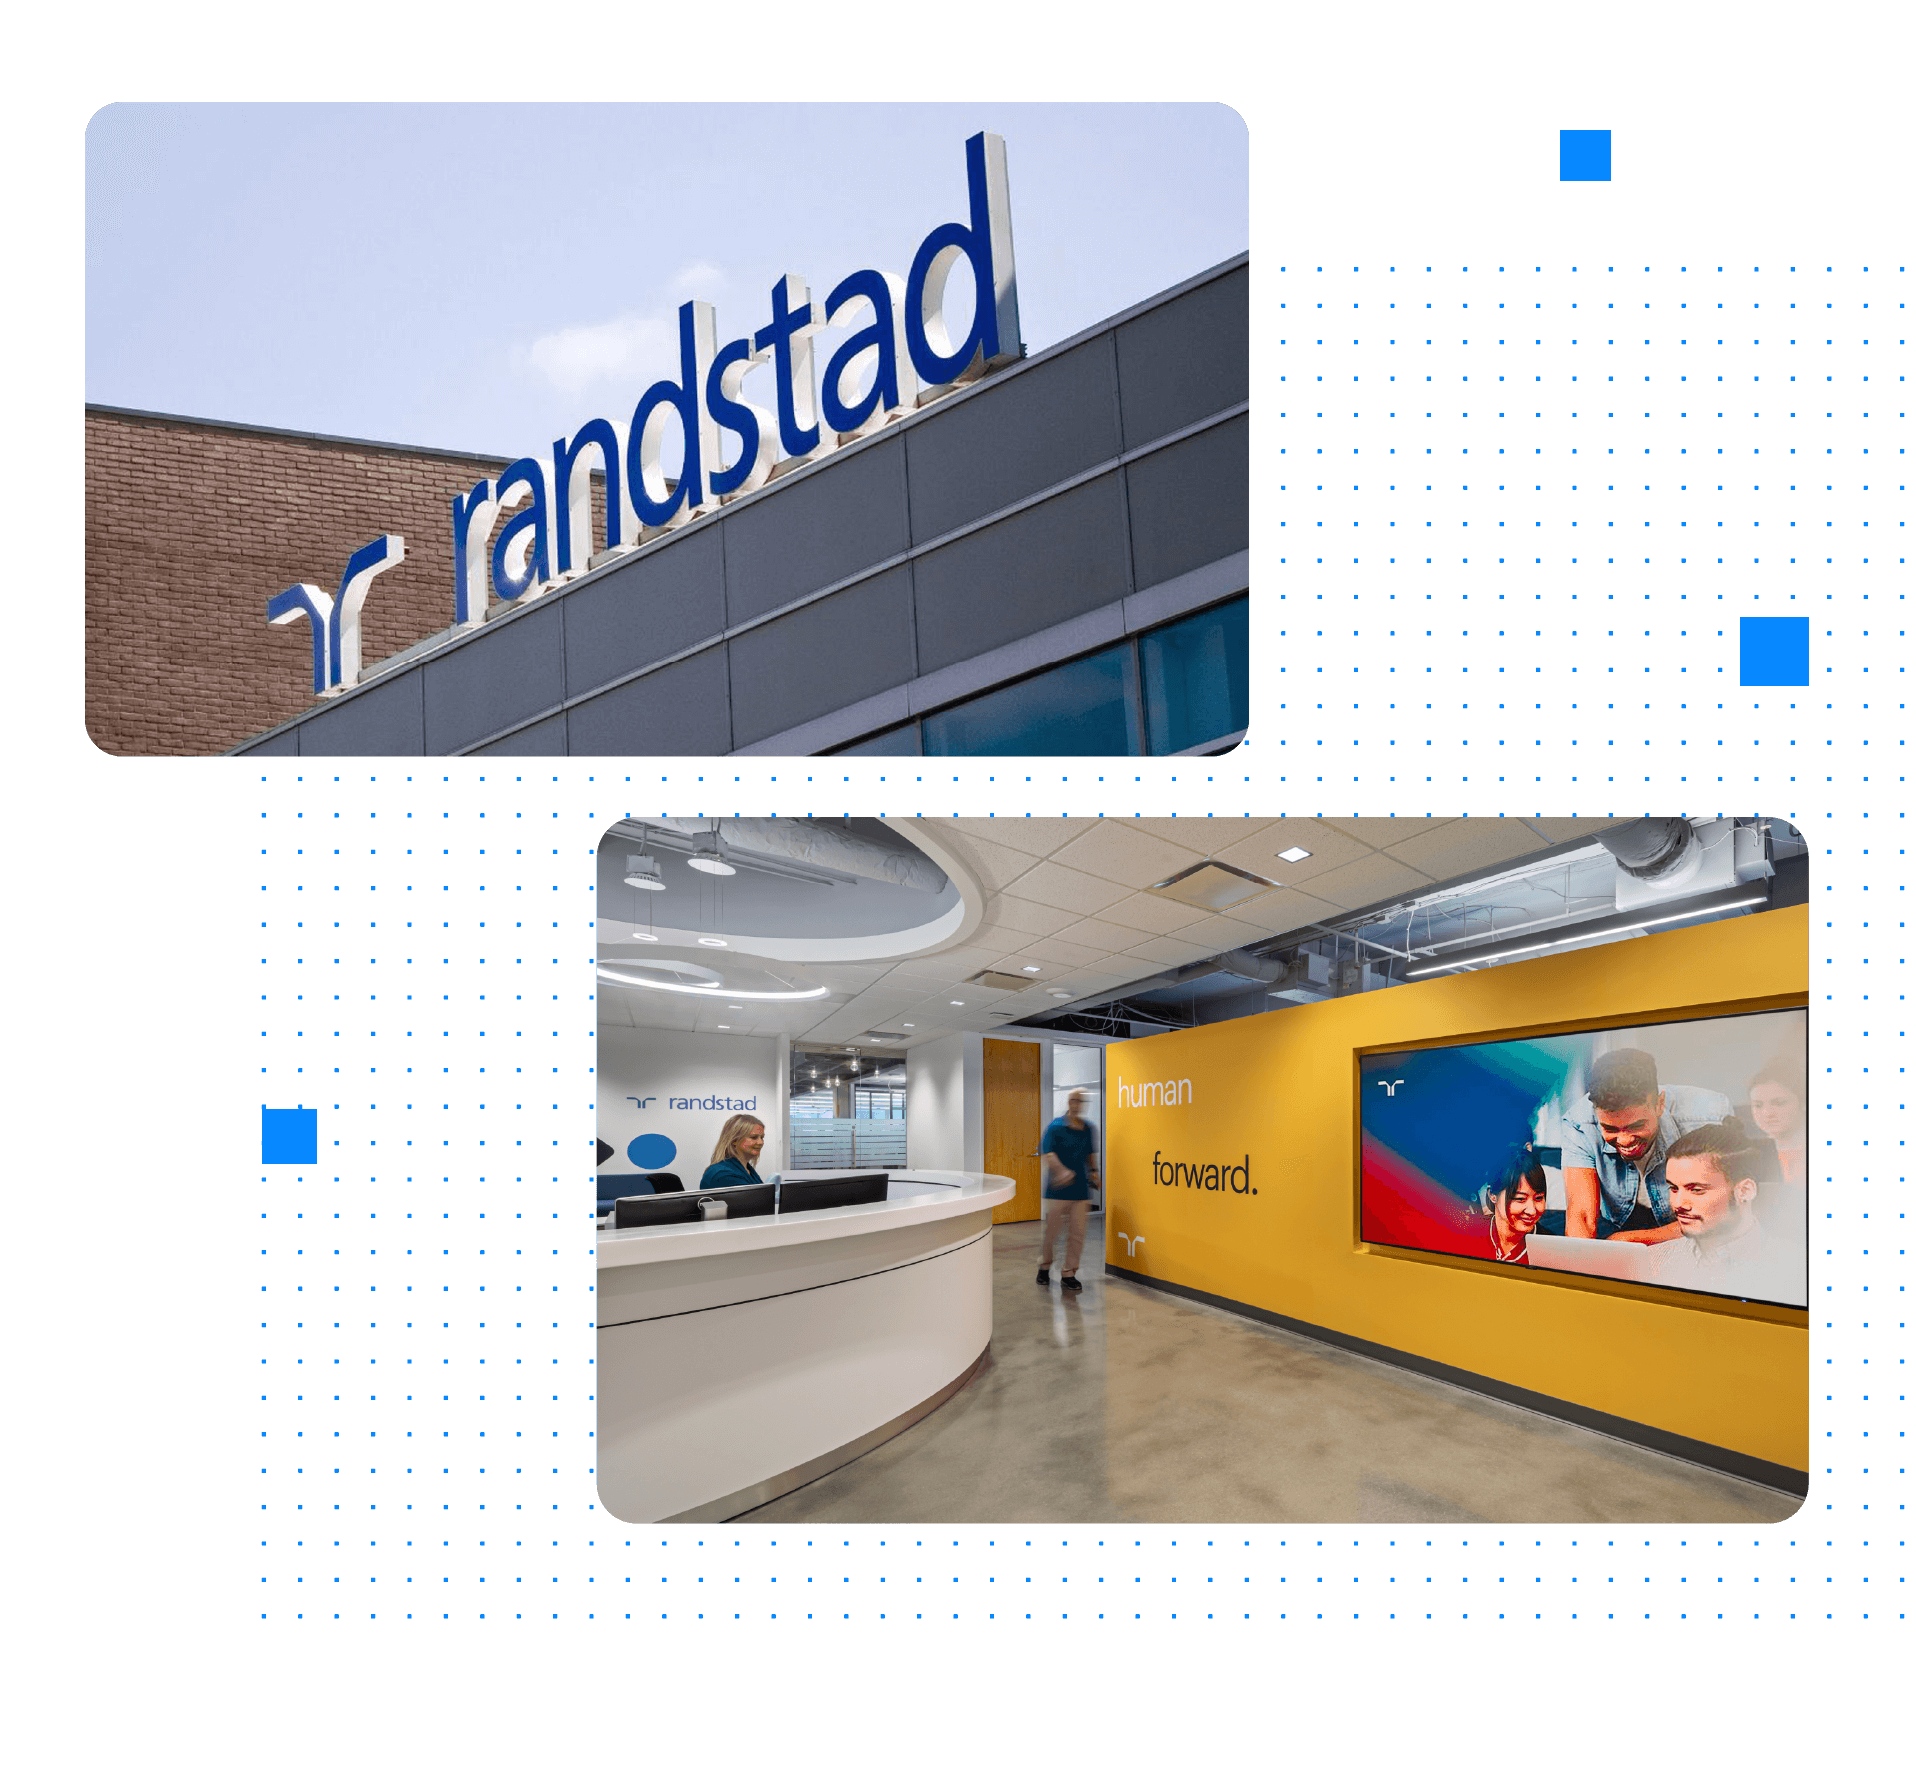 Randstad logo and office